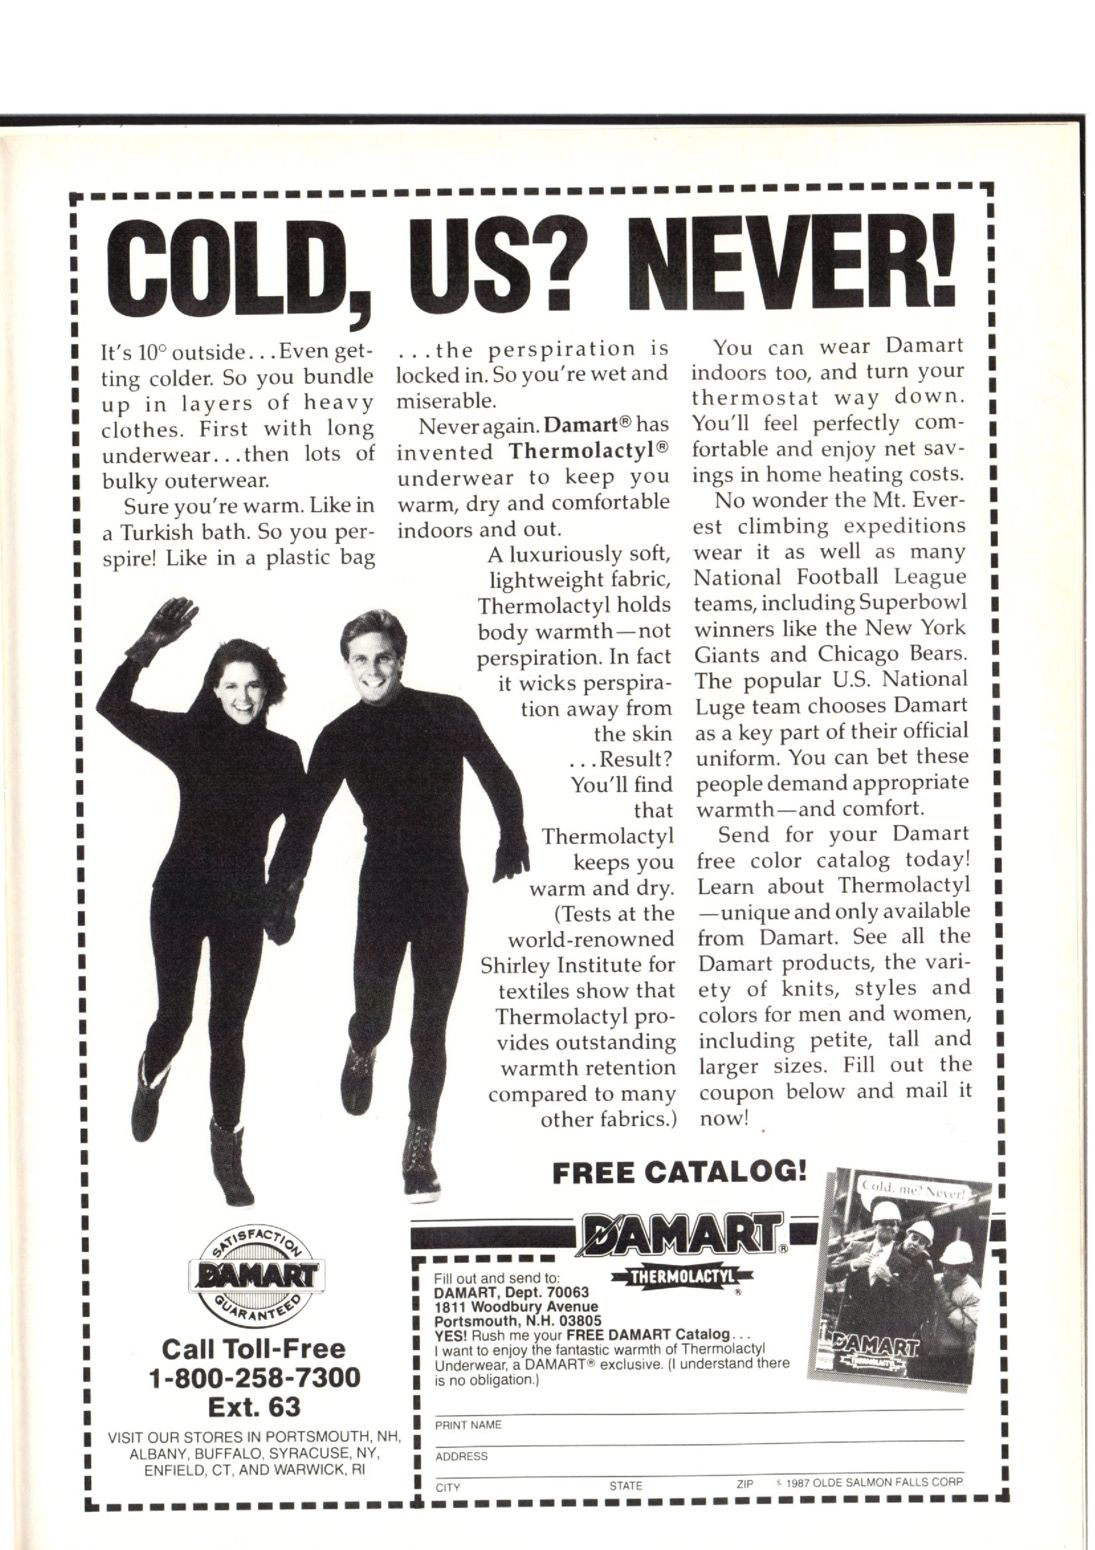 1979 Damart Thermolactyl Underweear Ad - Laugh at the Cold 